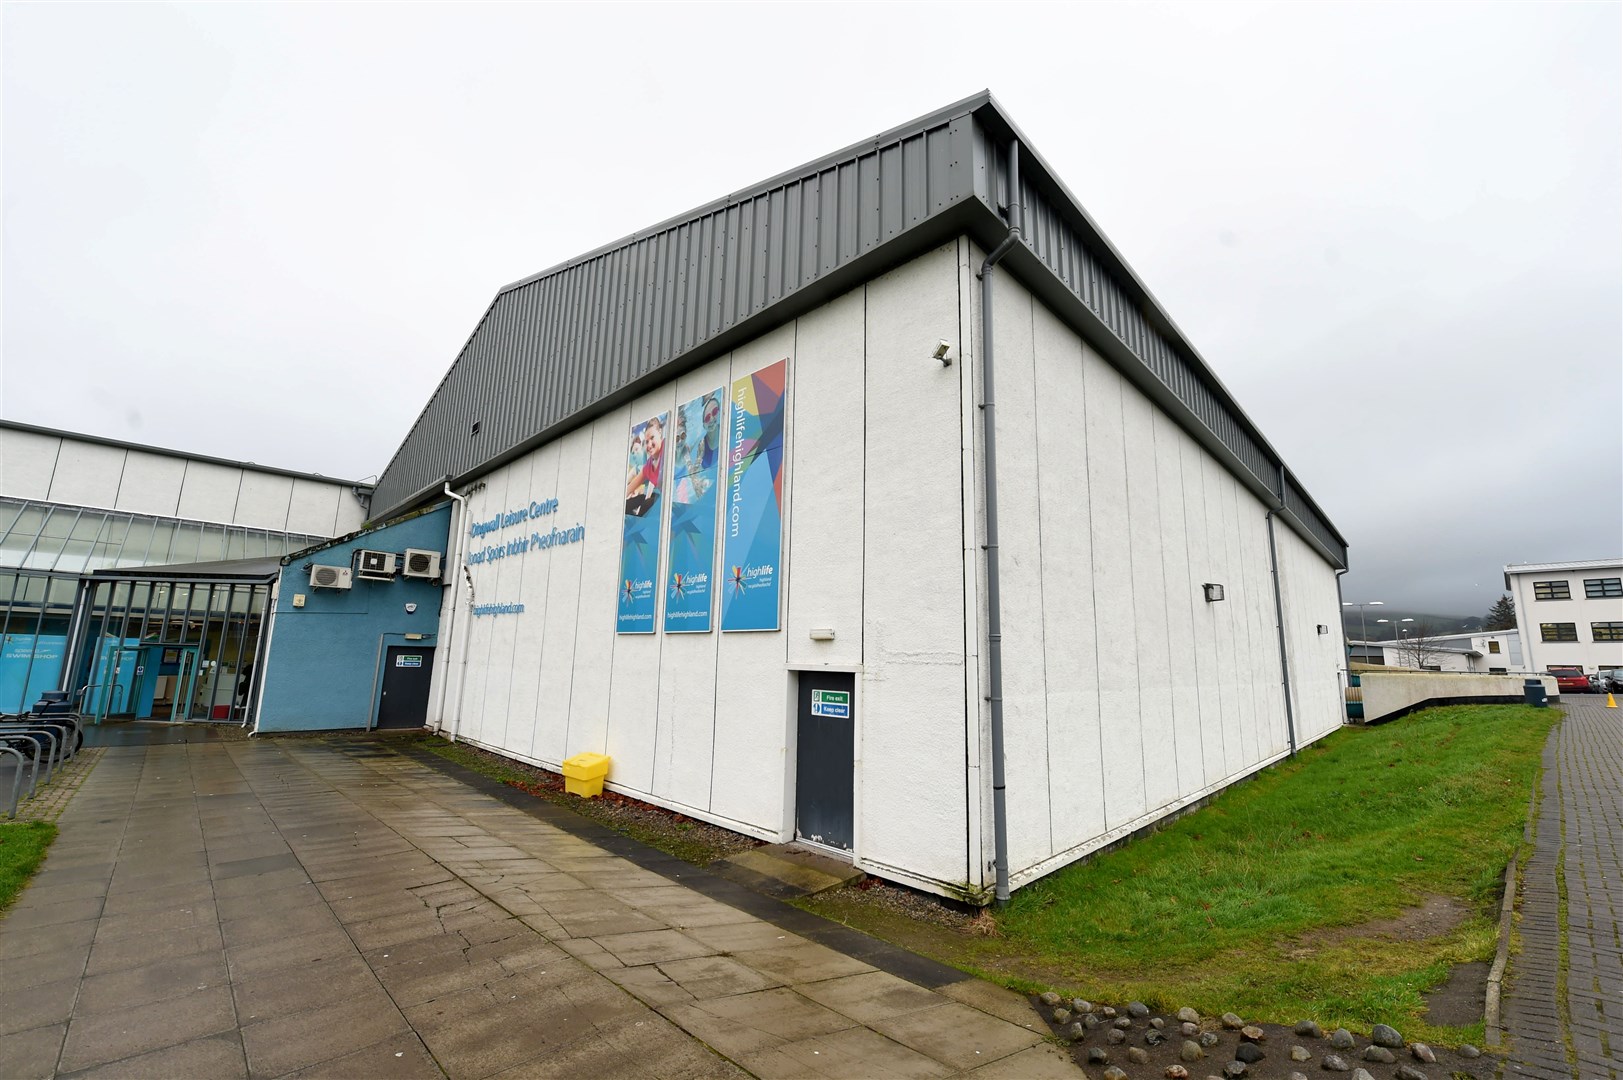 Dingwall Leisure Centre could see a major revamp.